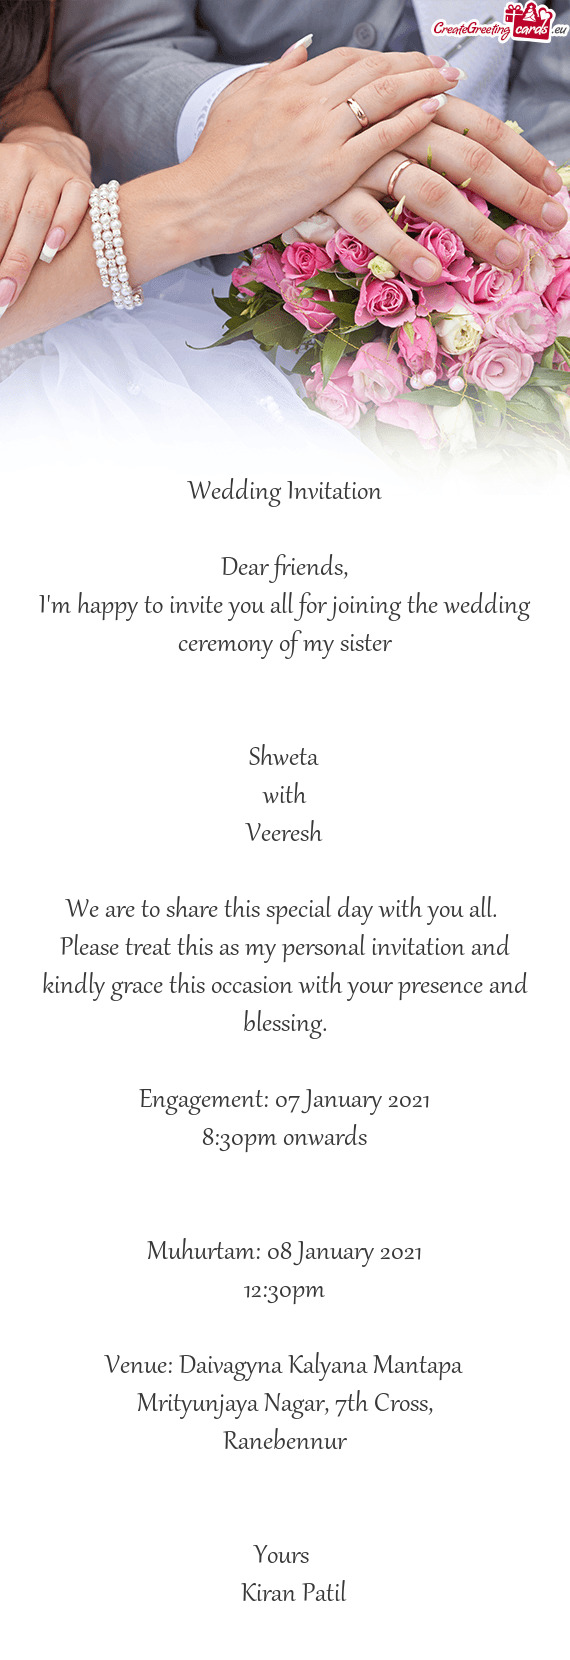 We are to share this special day with you all. Please treat this as my personal invitation and kind